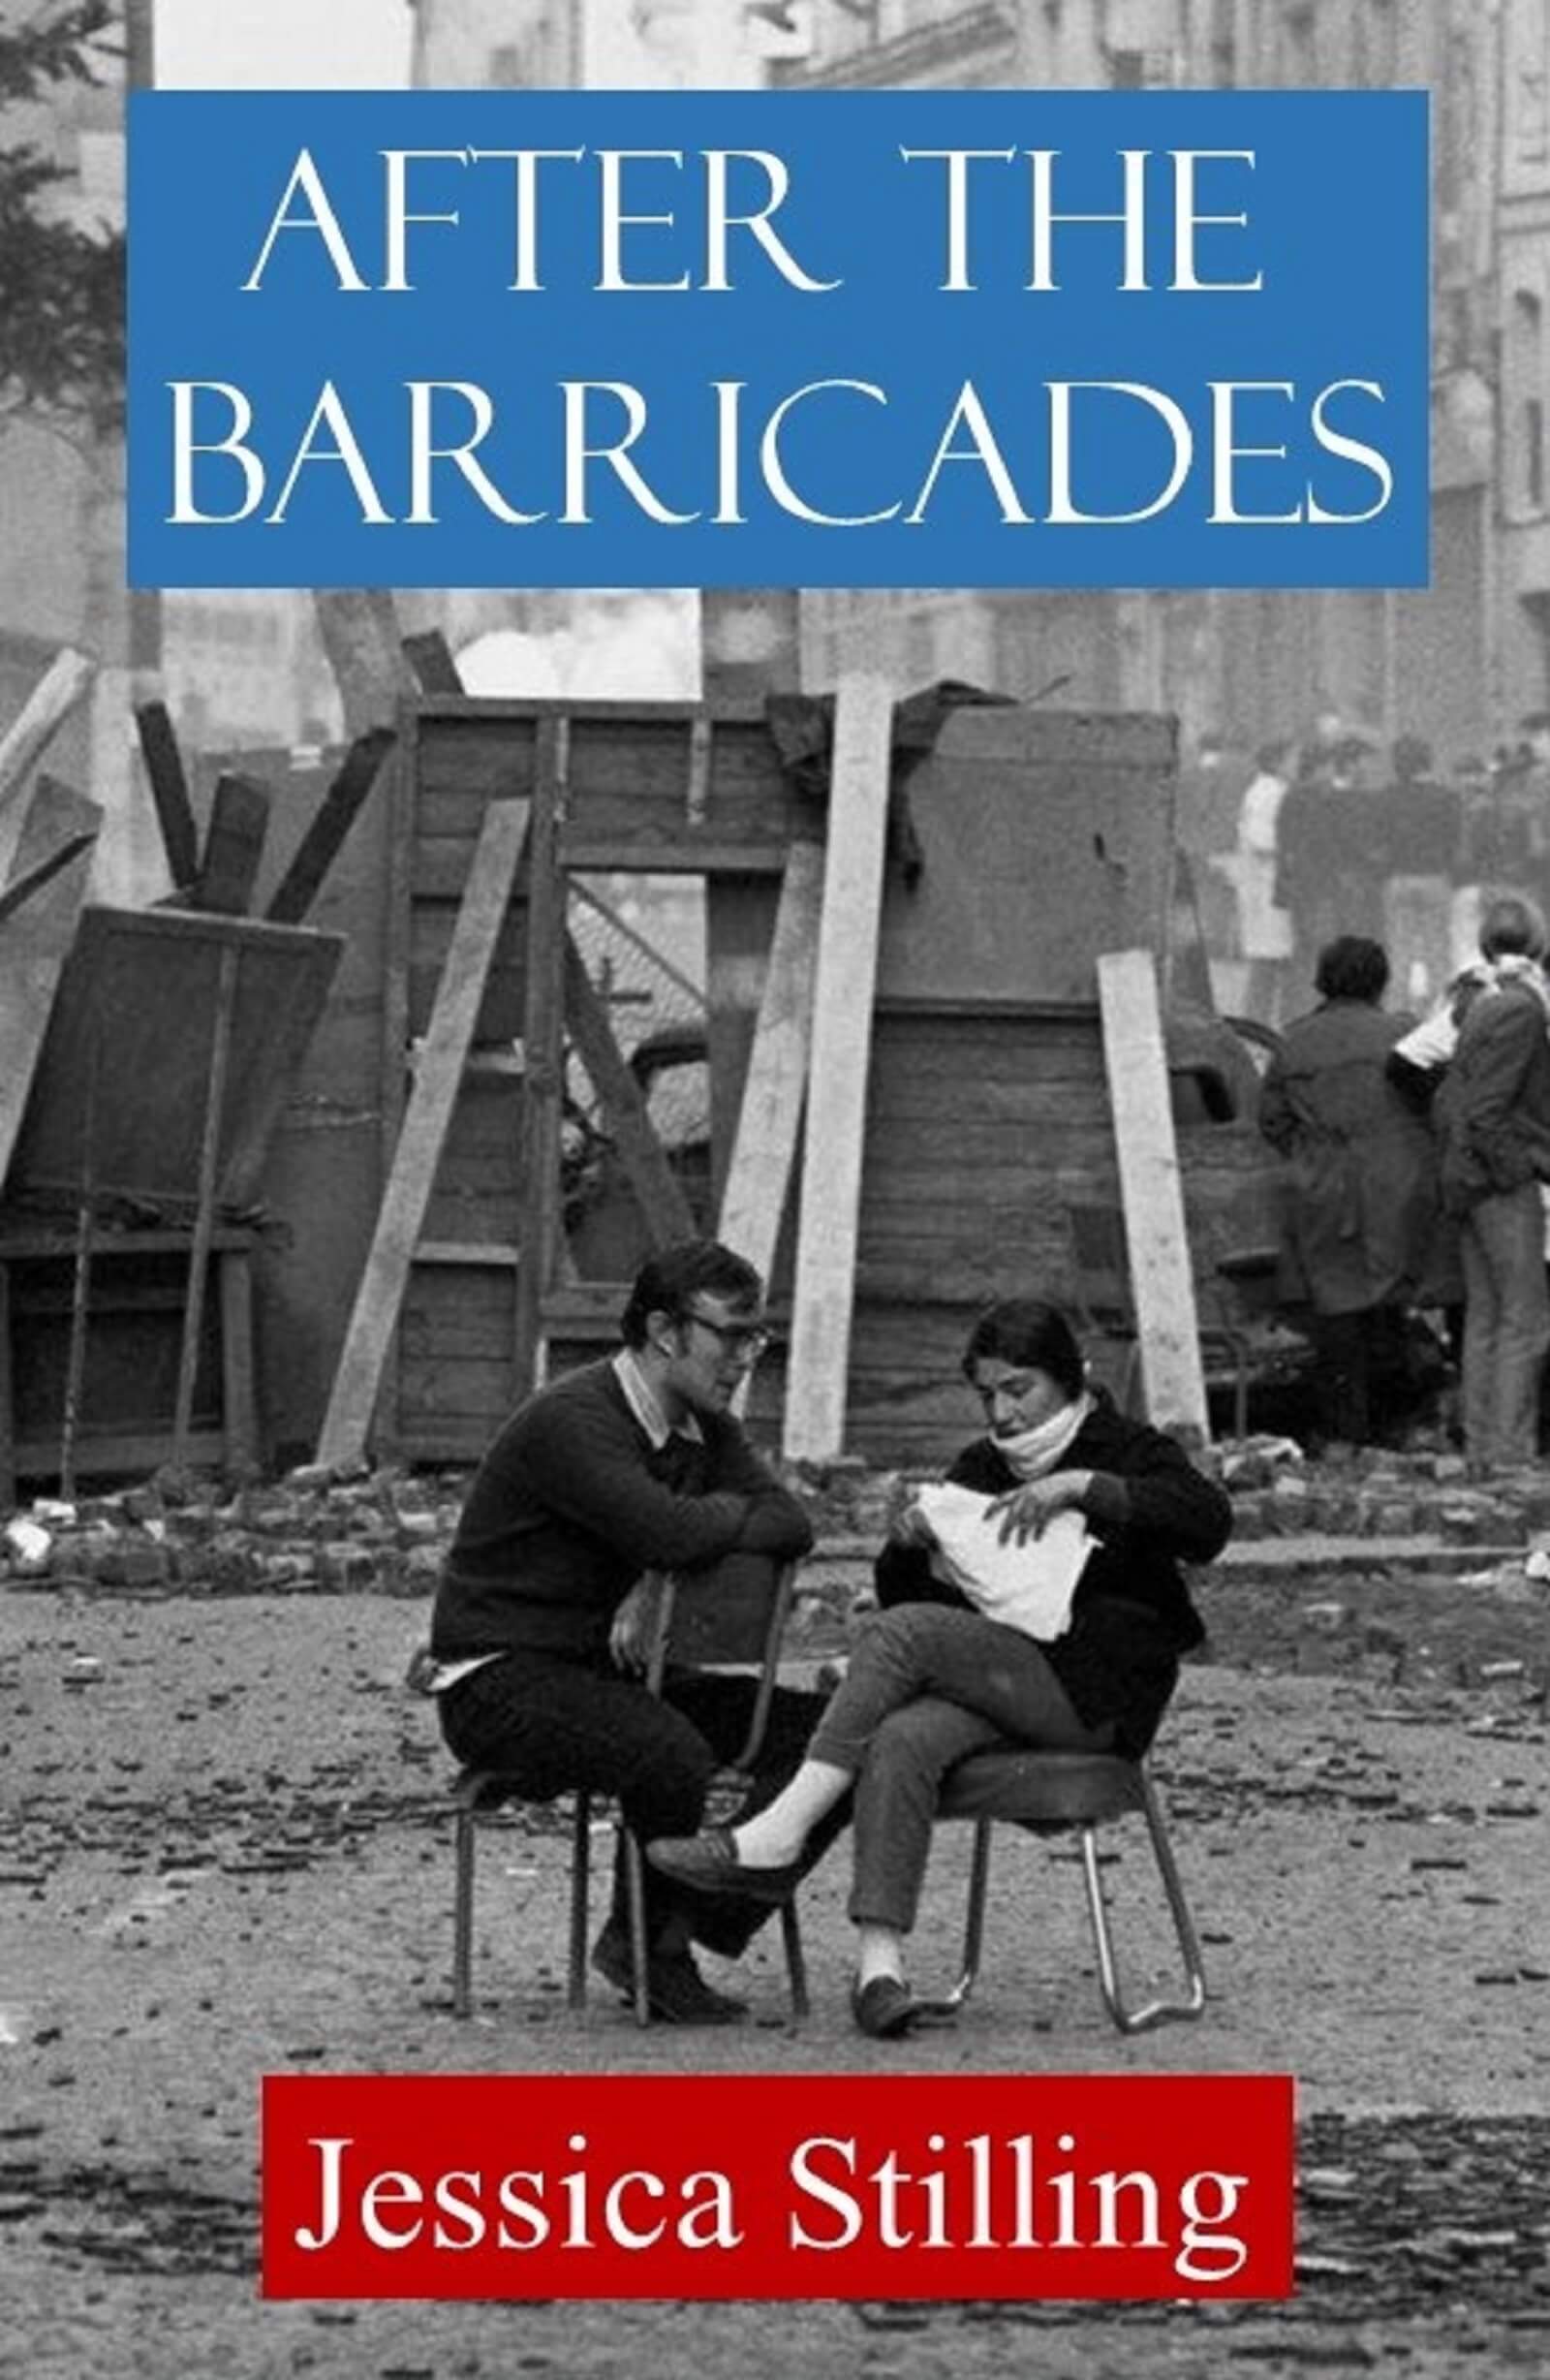 After the Barricades book cover